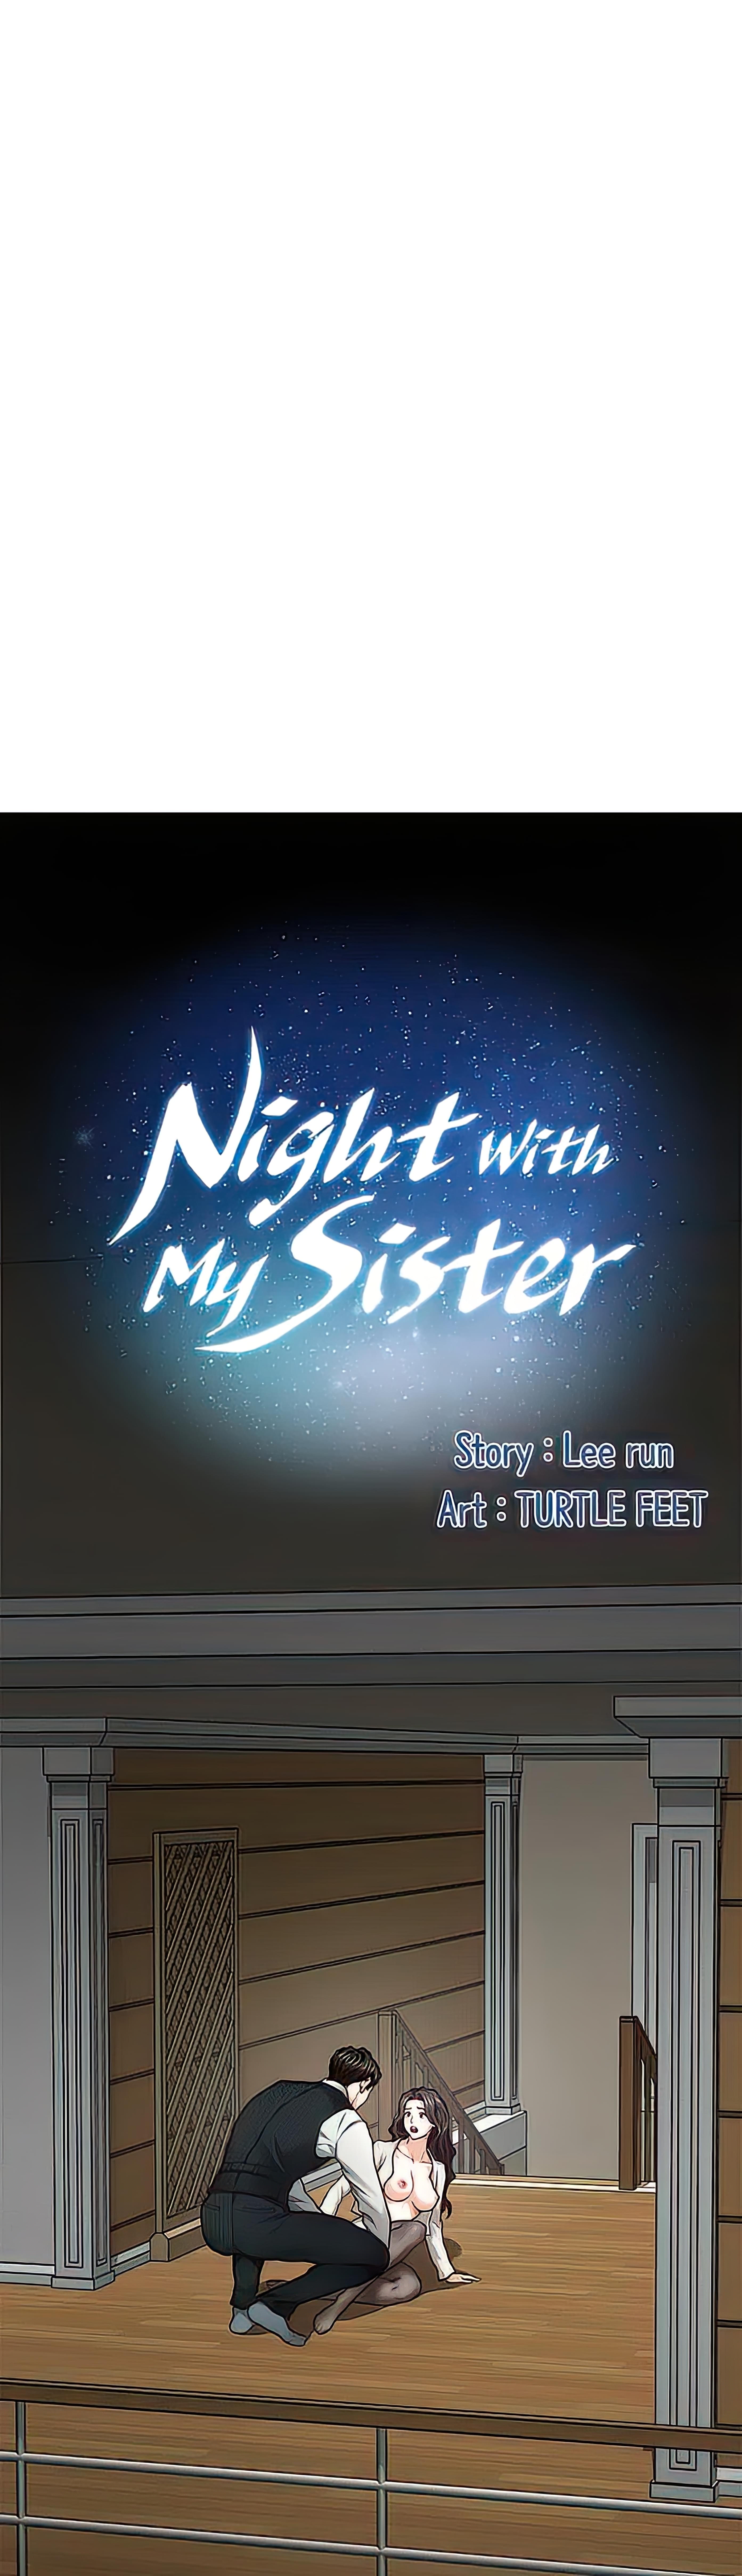 Night With My Sister image